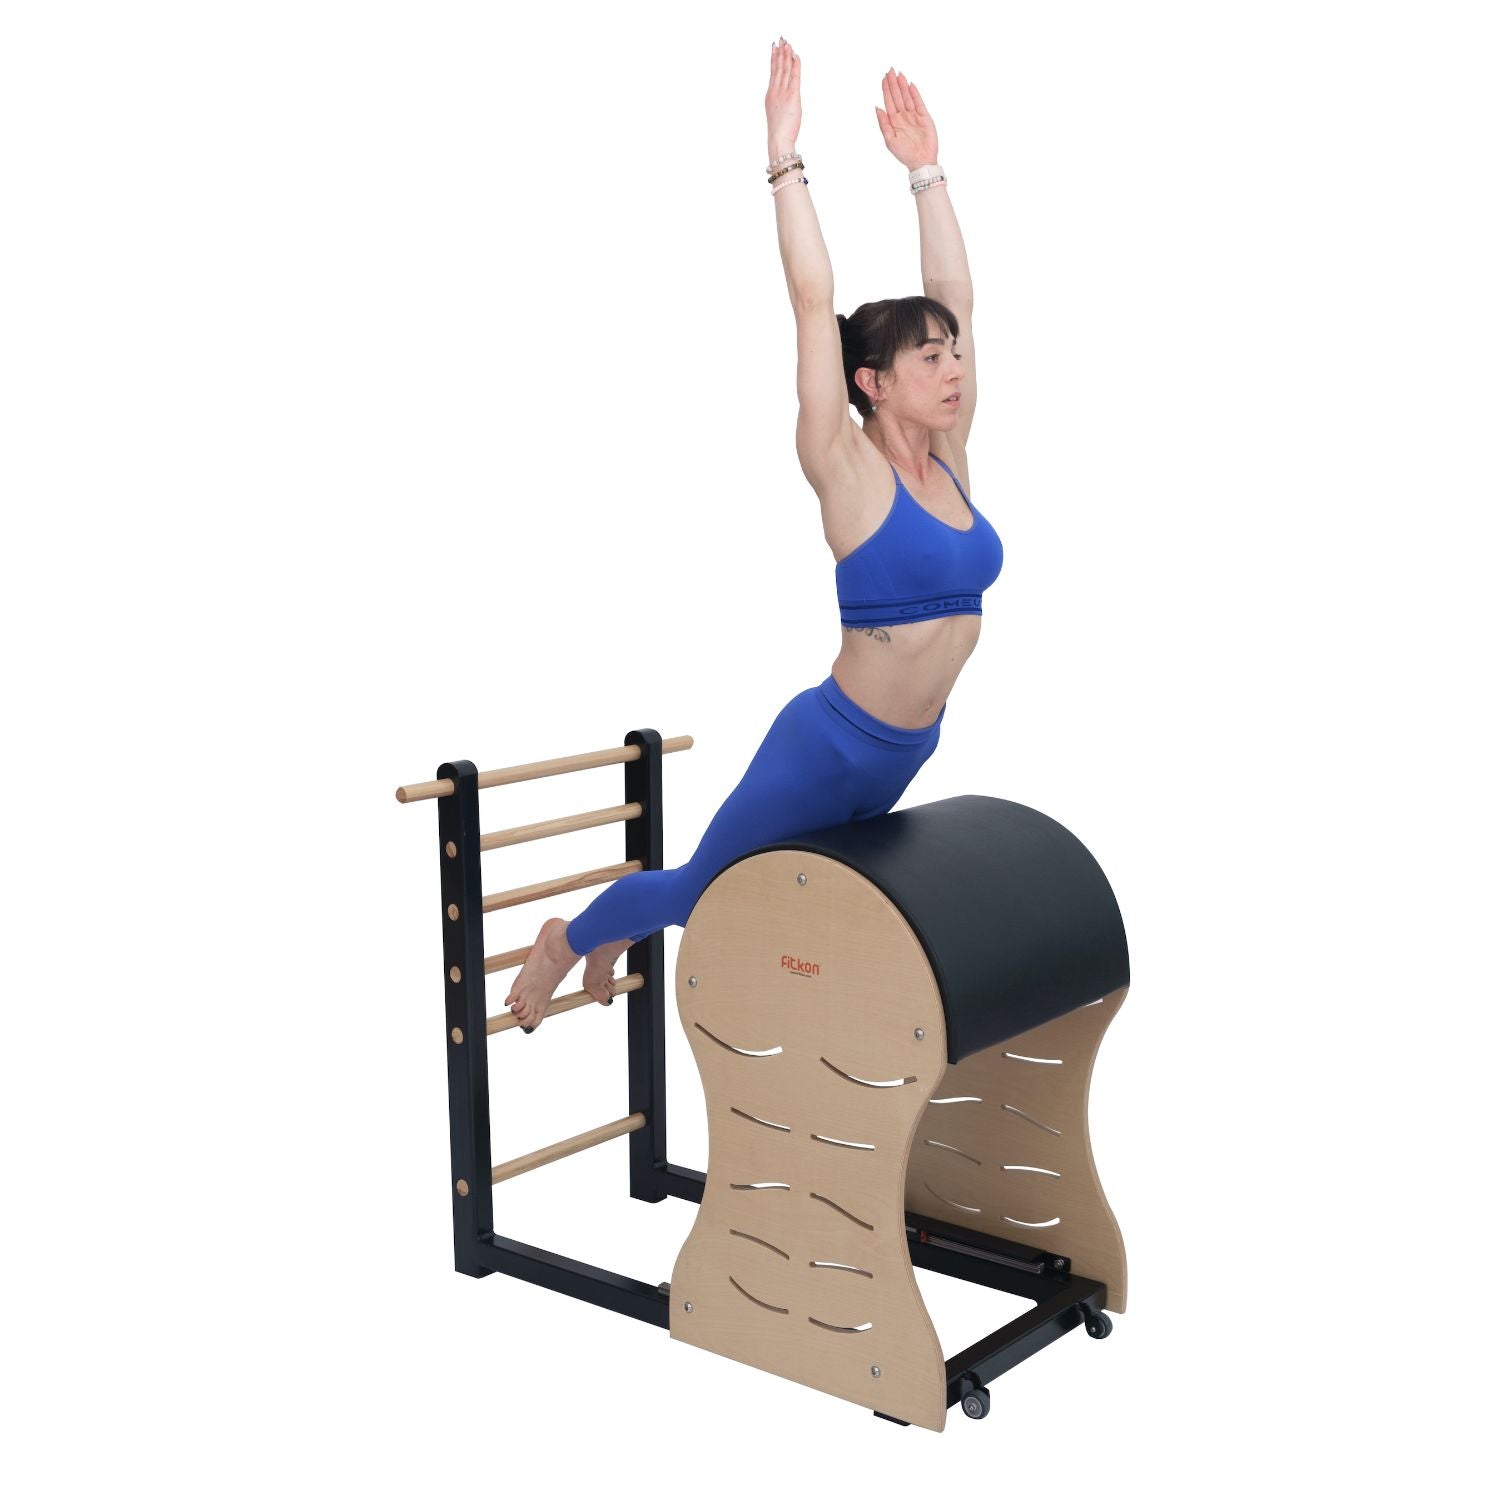 Pilates Ladder Barrel - Have you tried it? - ProHealth Physical